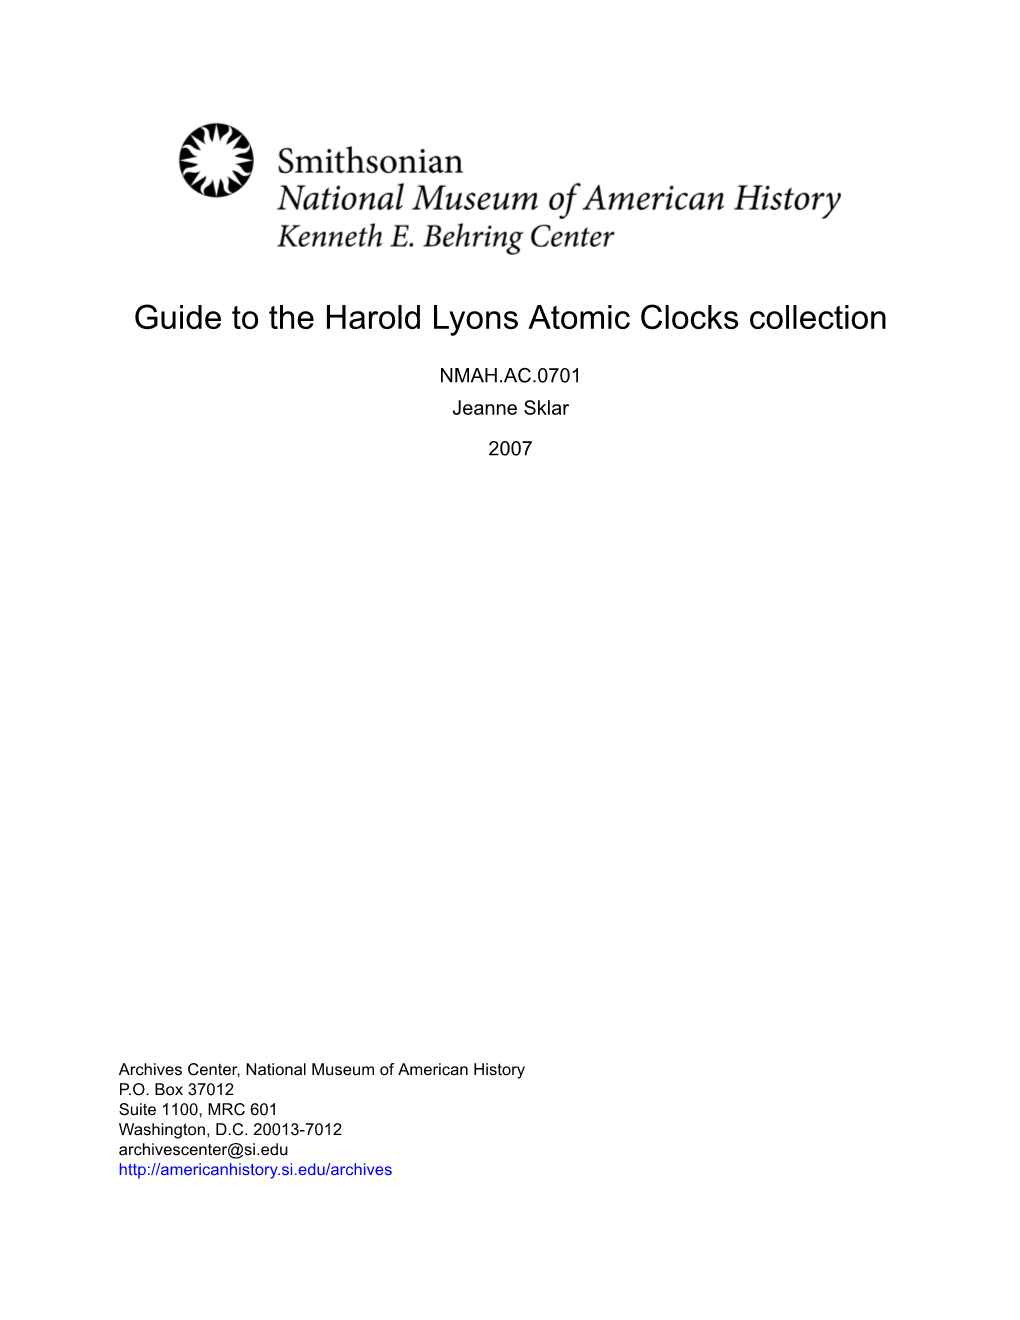 Guide to the Harold Lyons Atomic Clocks Collection